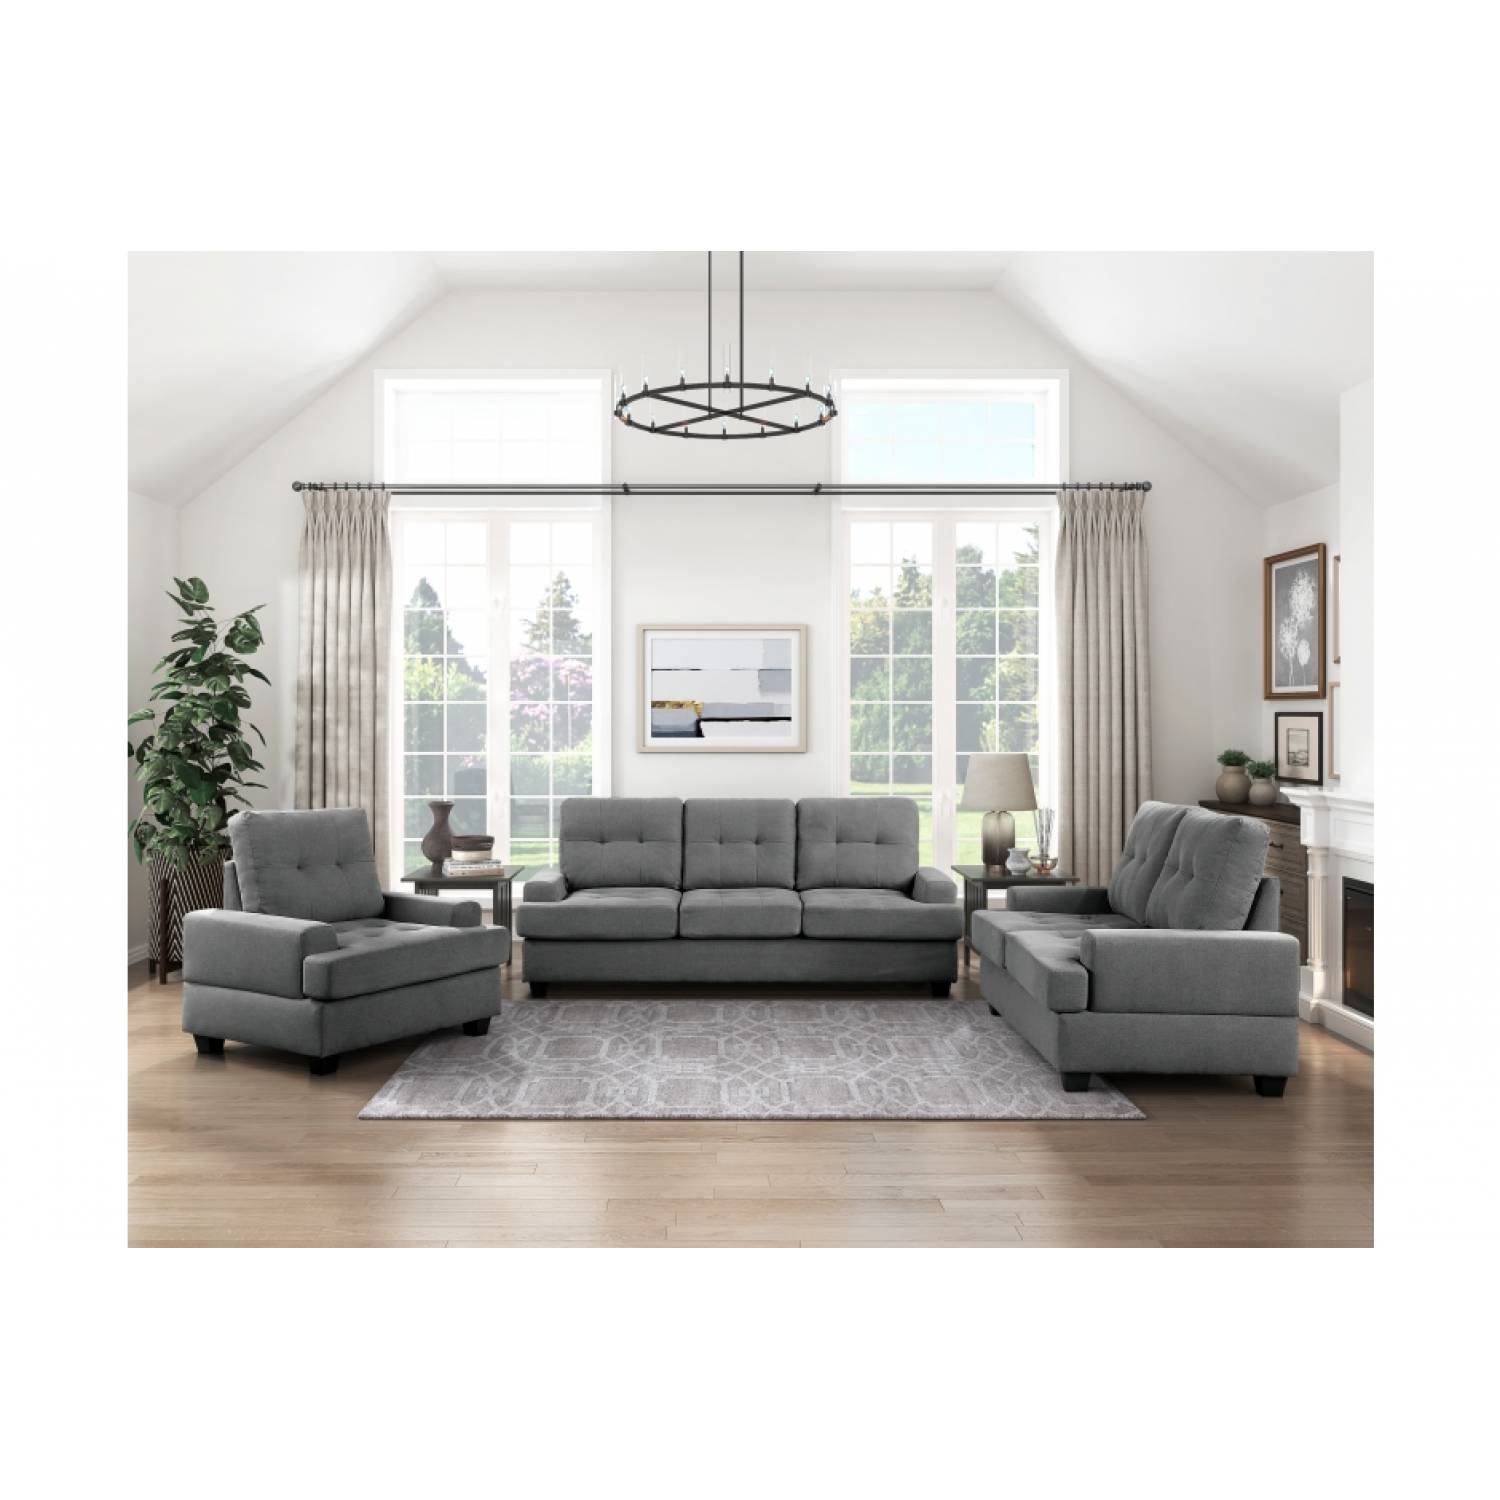 9367dgy 3n 3pc Sets Sofa With Drop Down